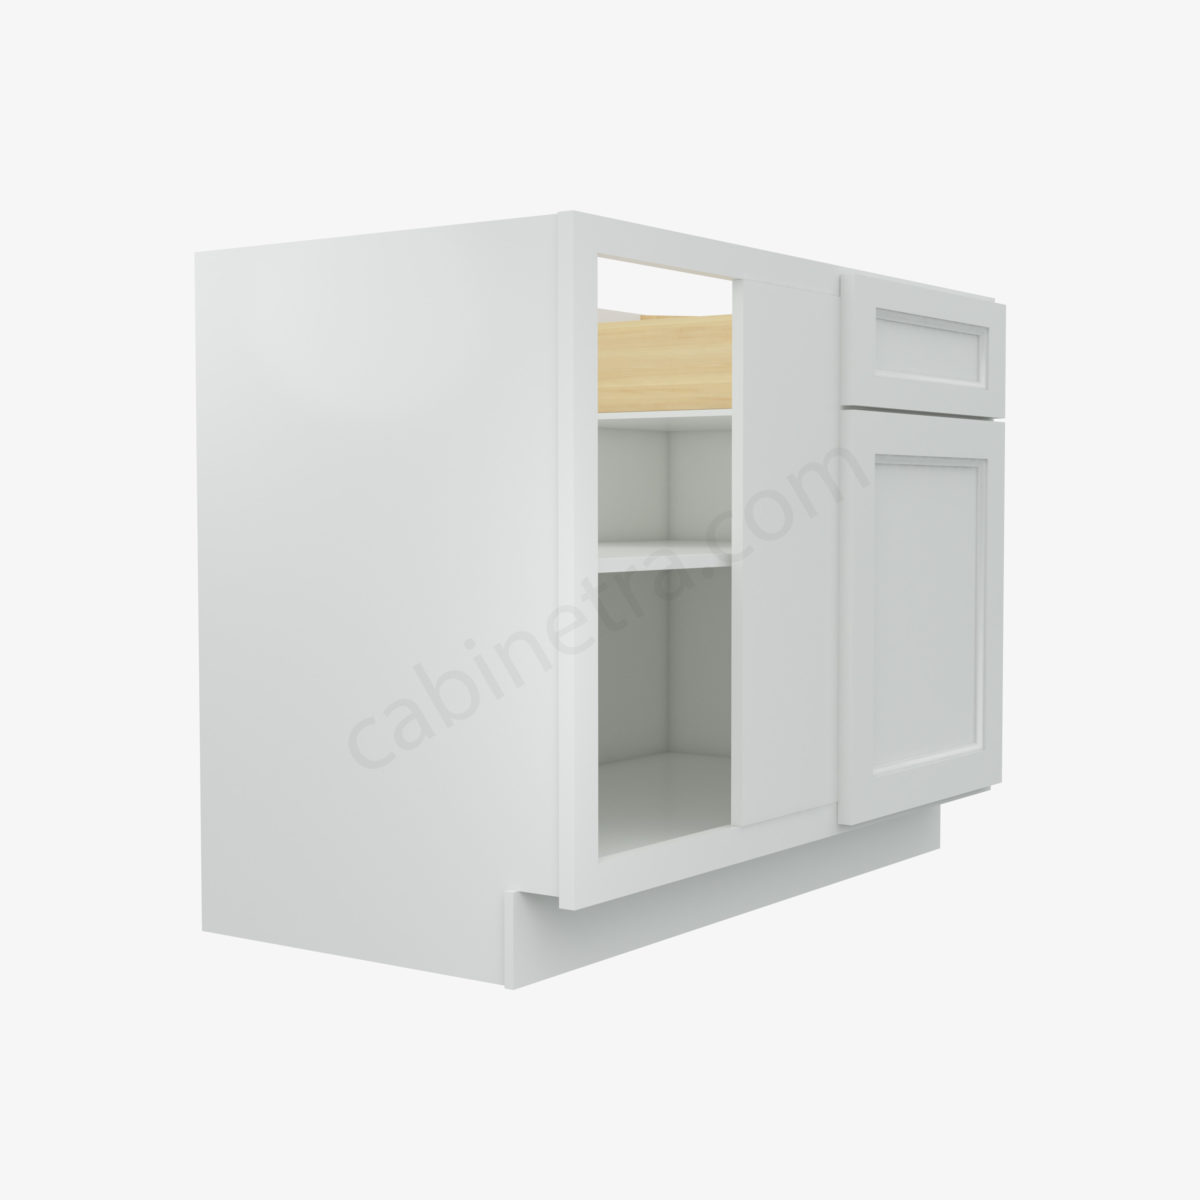 TW BBLC45 48 42W 4 Forevermark Uptown White Cabinetra scaled